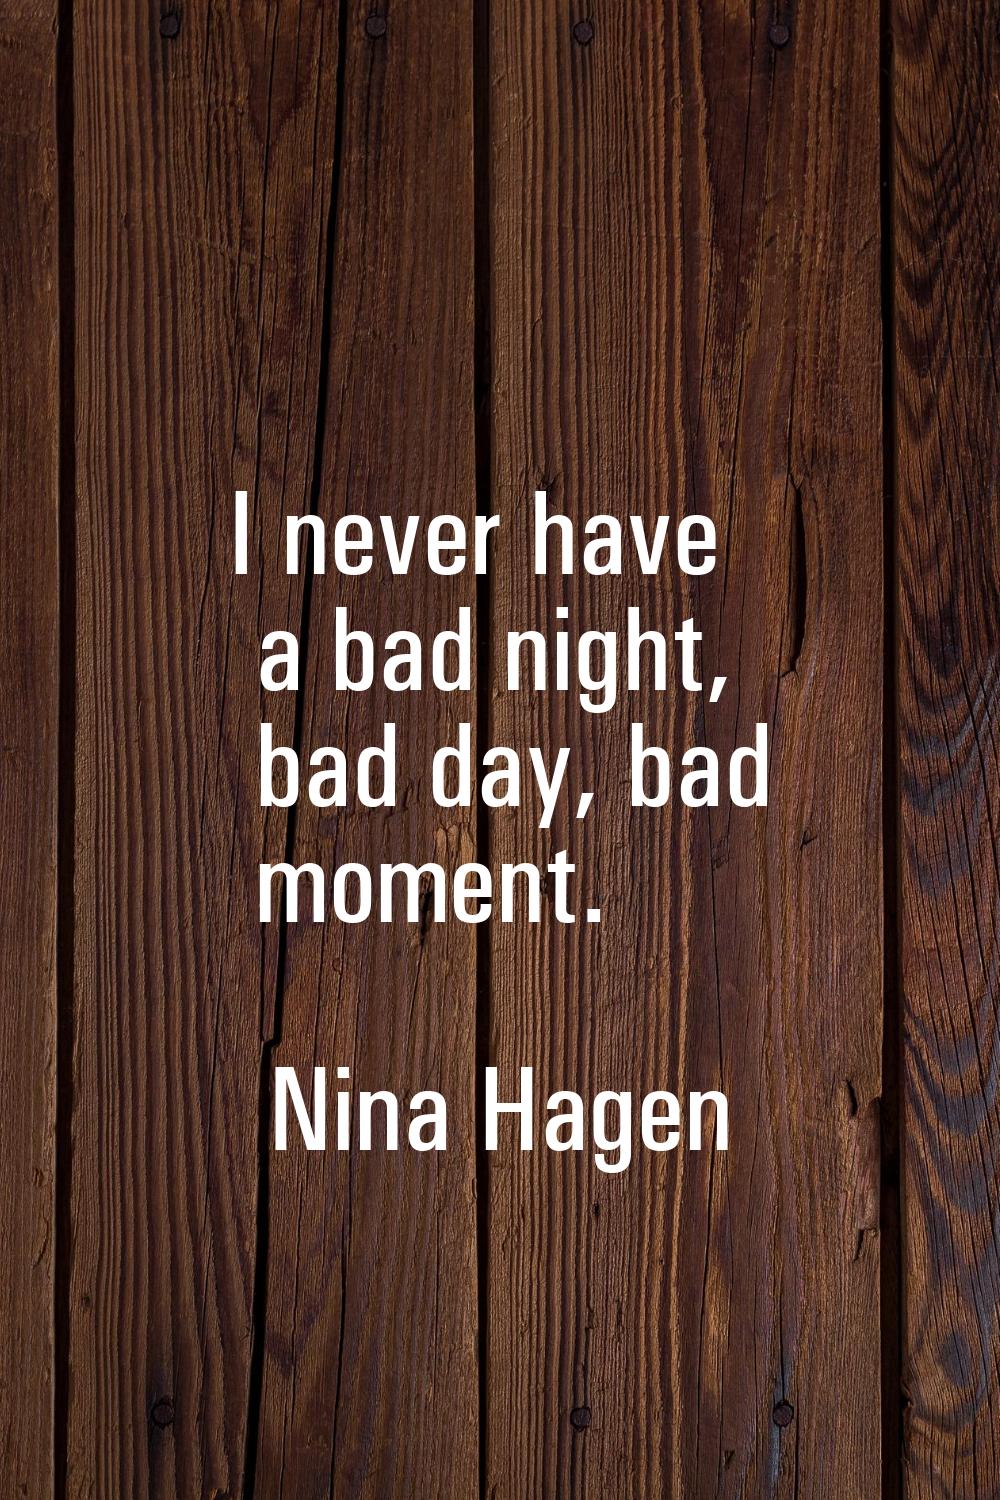 I never have a bad night, bad day, bad moment.